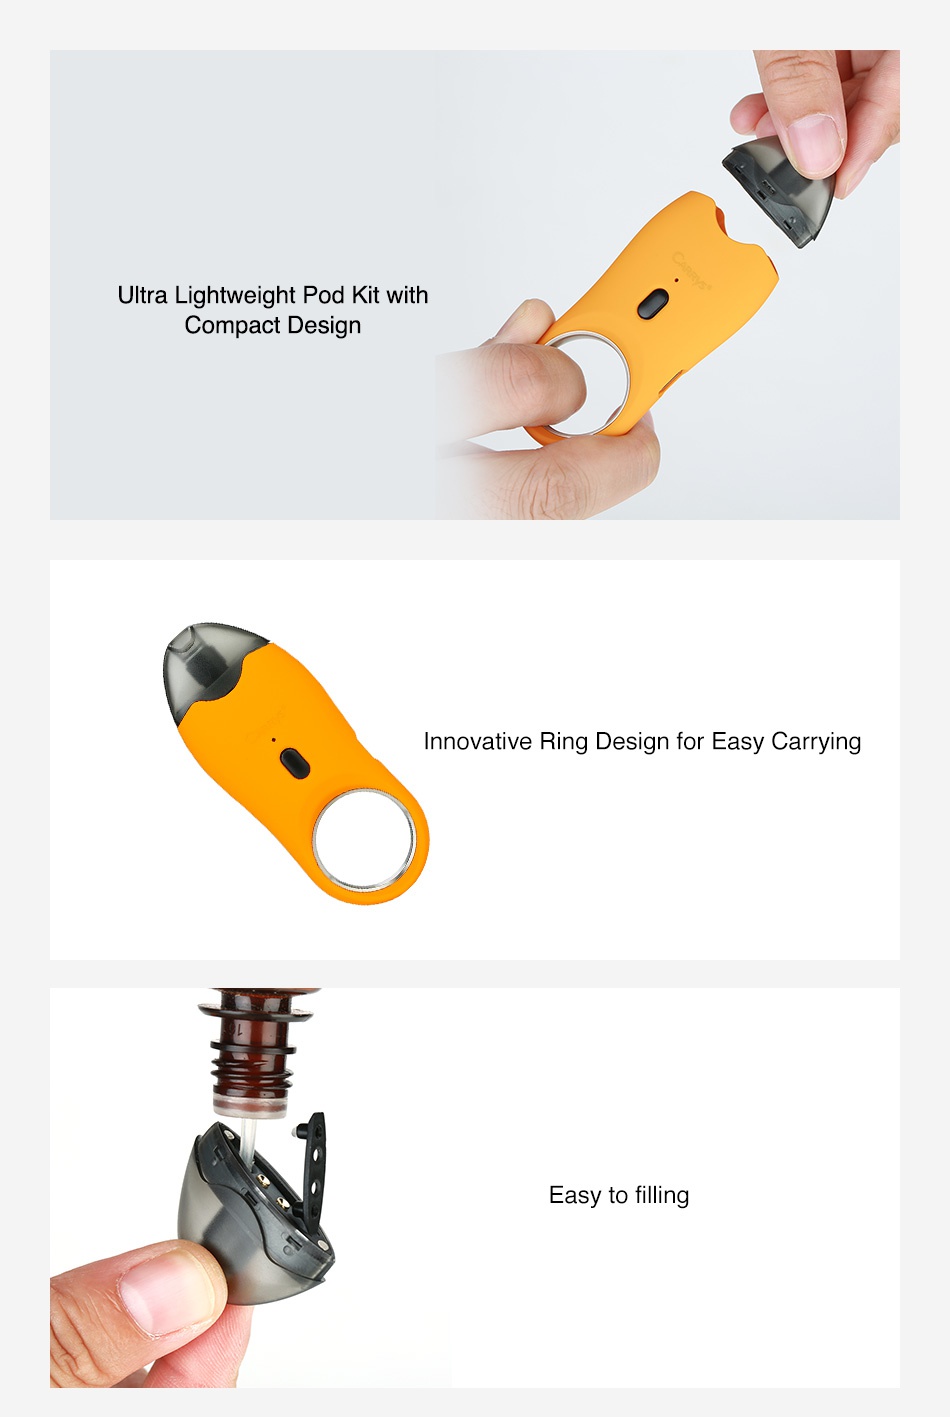 CARRYS Ring Pod Starter Kit 300mAh Ultra Lightweight Pod Kit with Compact Design Innovative Ring Design for Easy Carrying Easy to filling